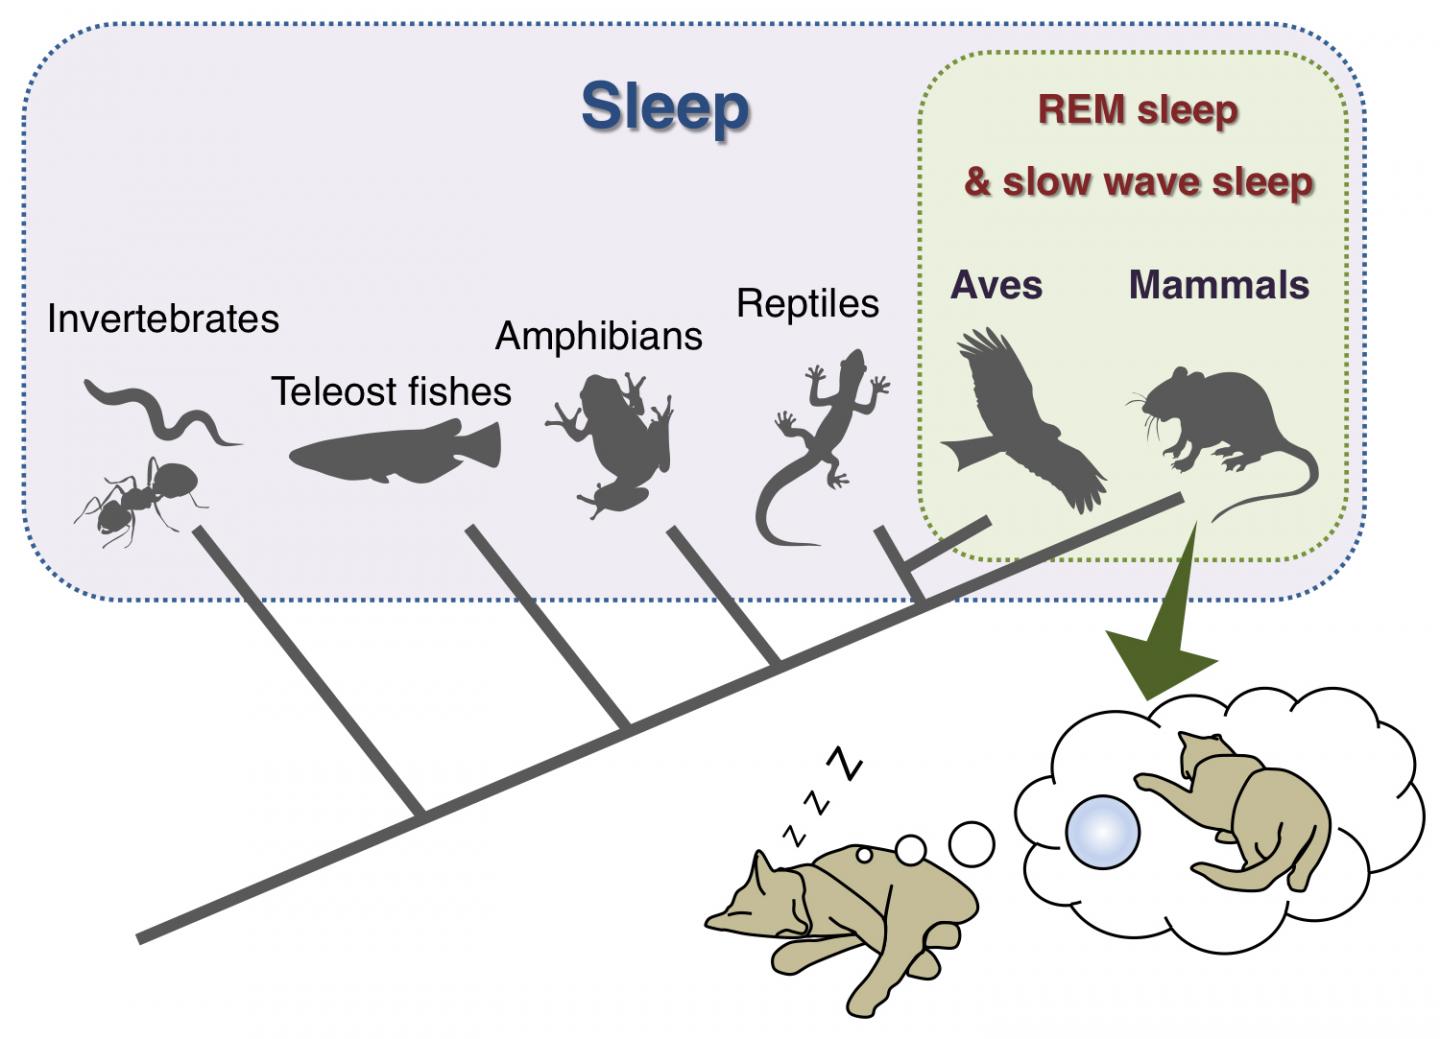 REM Sleep is Unique to Mammals and Birds